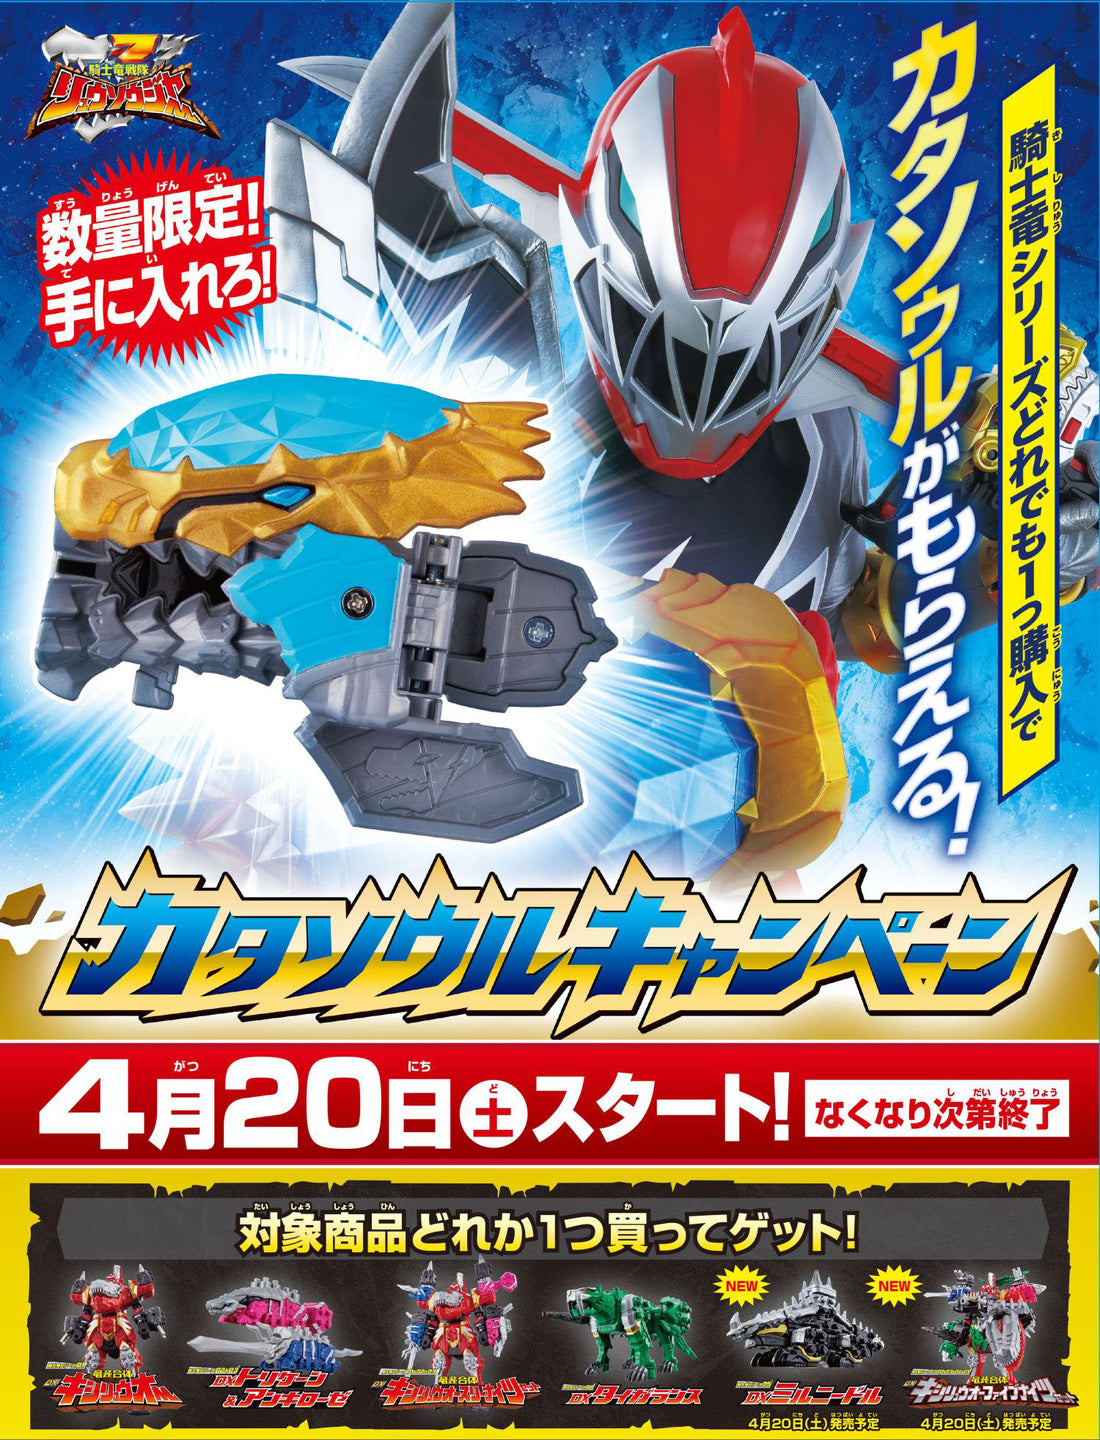 Ryusoulger: Katasoul Campaign starts from April 20th!!